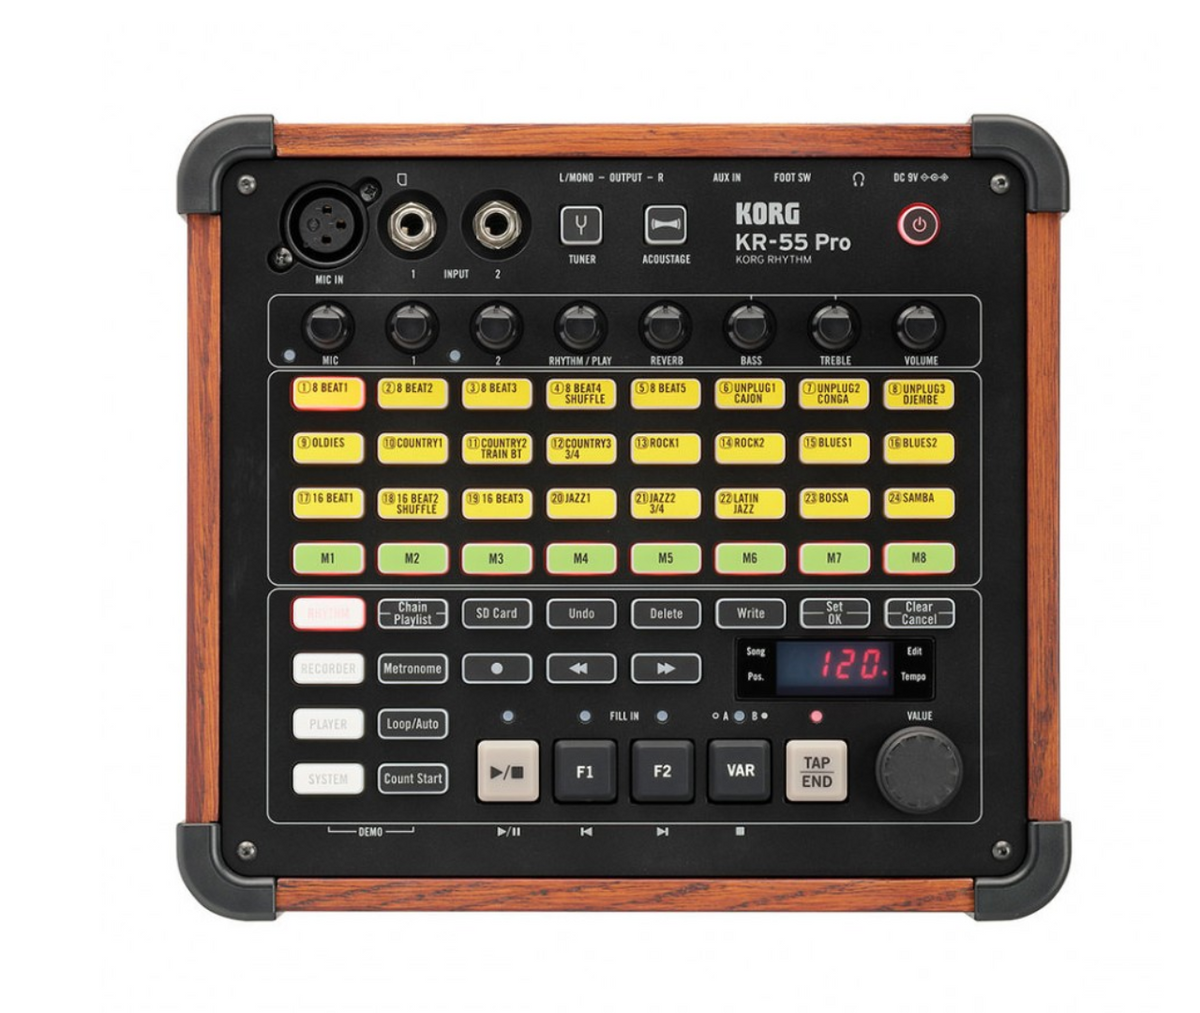 KORG KR-55 Pro Rhythm Best Drum Beats Rhythm Machine with Multi-function Mixer/Recorder and 24 Built-in Drum/Percussion Styles